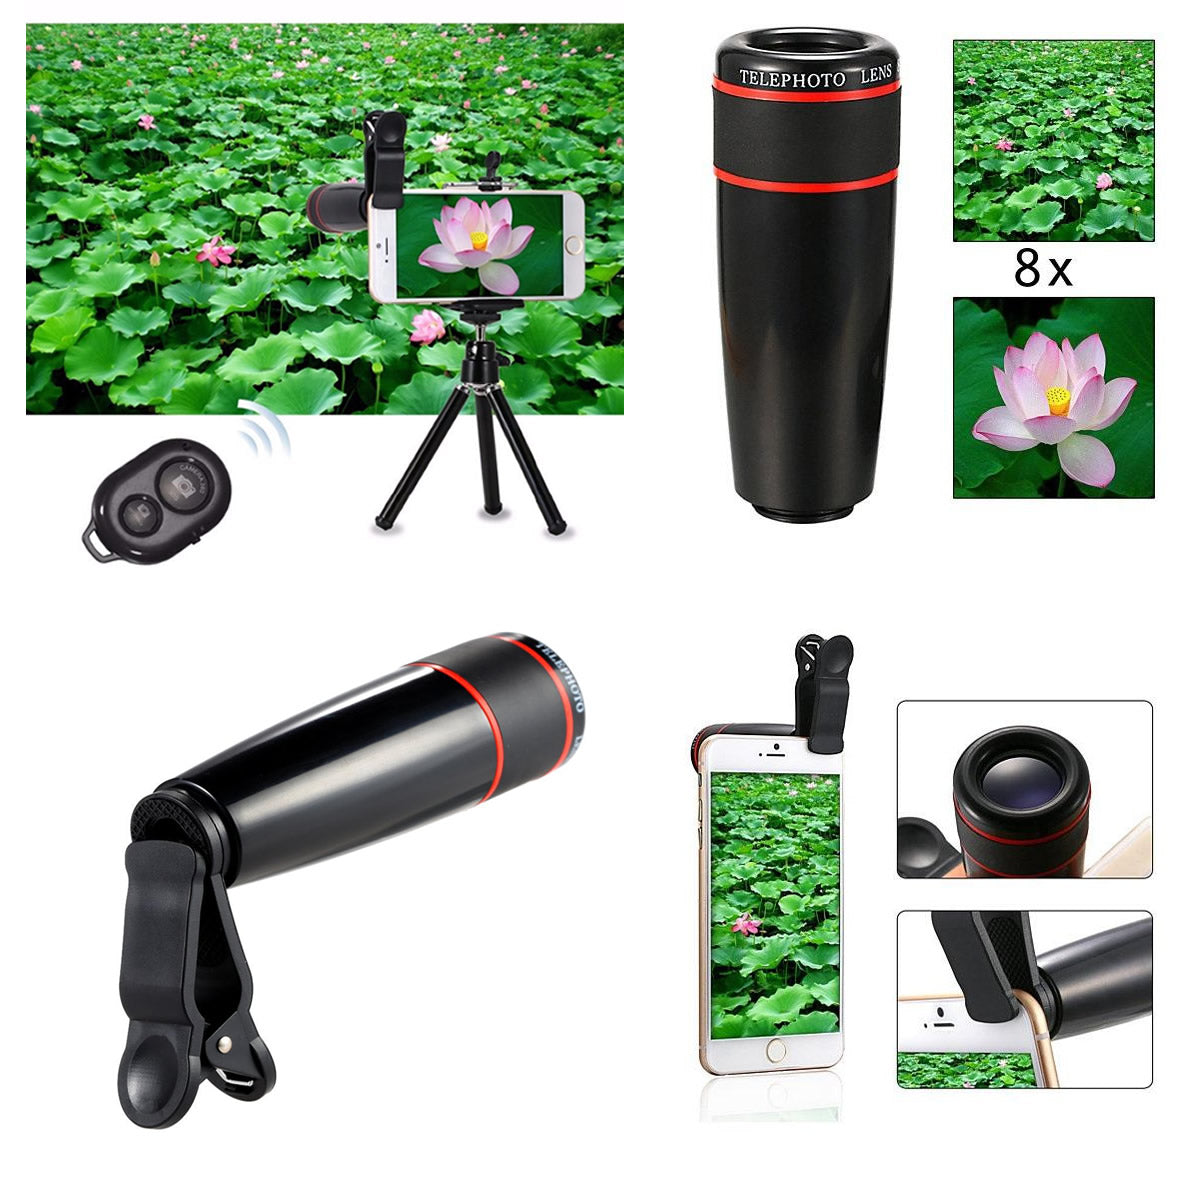 Upgrade Your Smartphone Photography with the 11 in 1 Smartphone Camera Lens Kit